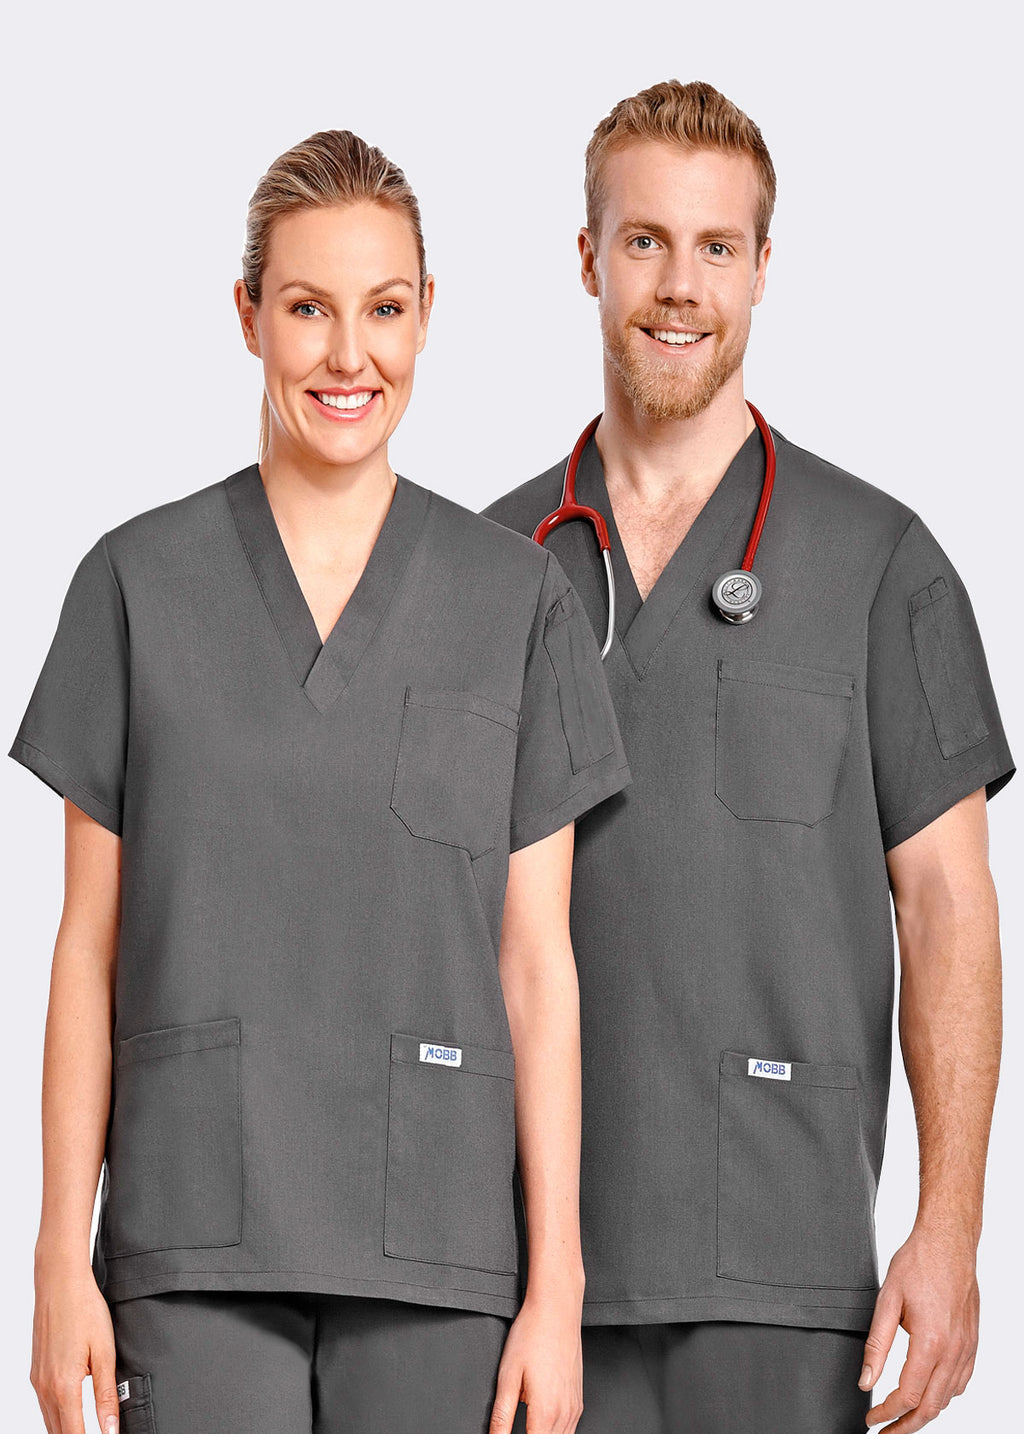 Product - The Andy Unisex MOBB Scrub Top